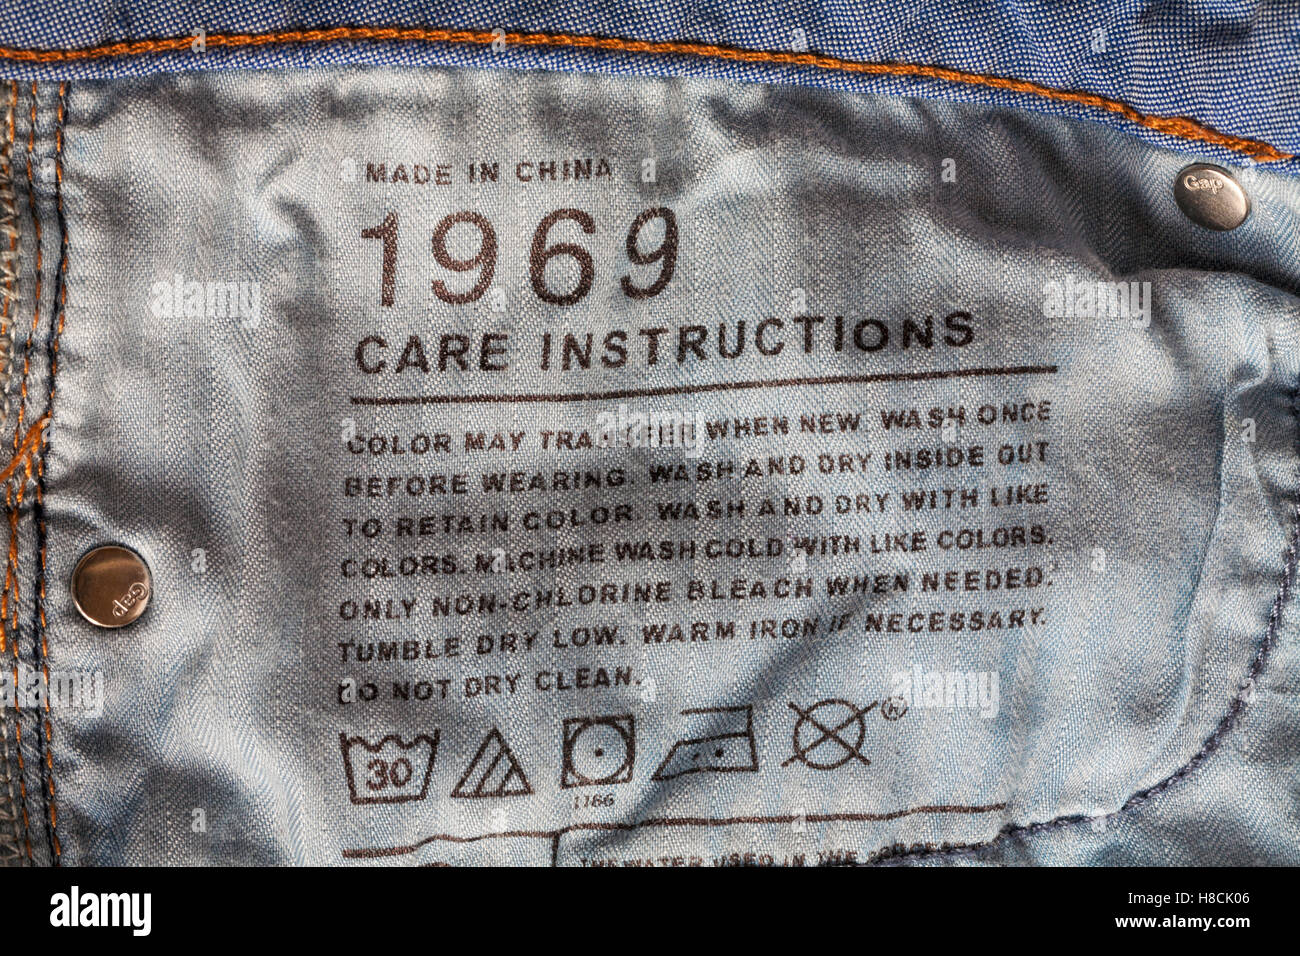 Care instructions stamped in GAP 1969 denim jeans made in China Stock Photo  - Alamy